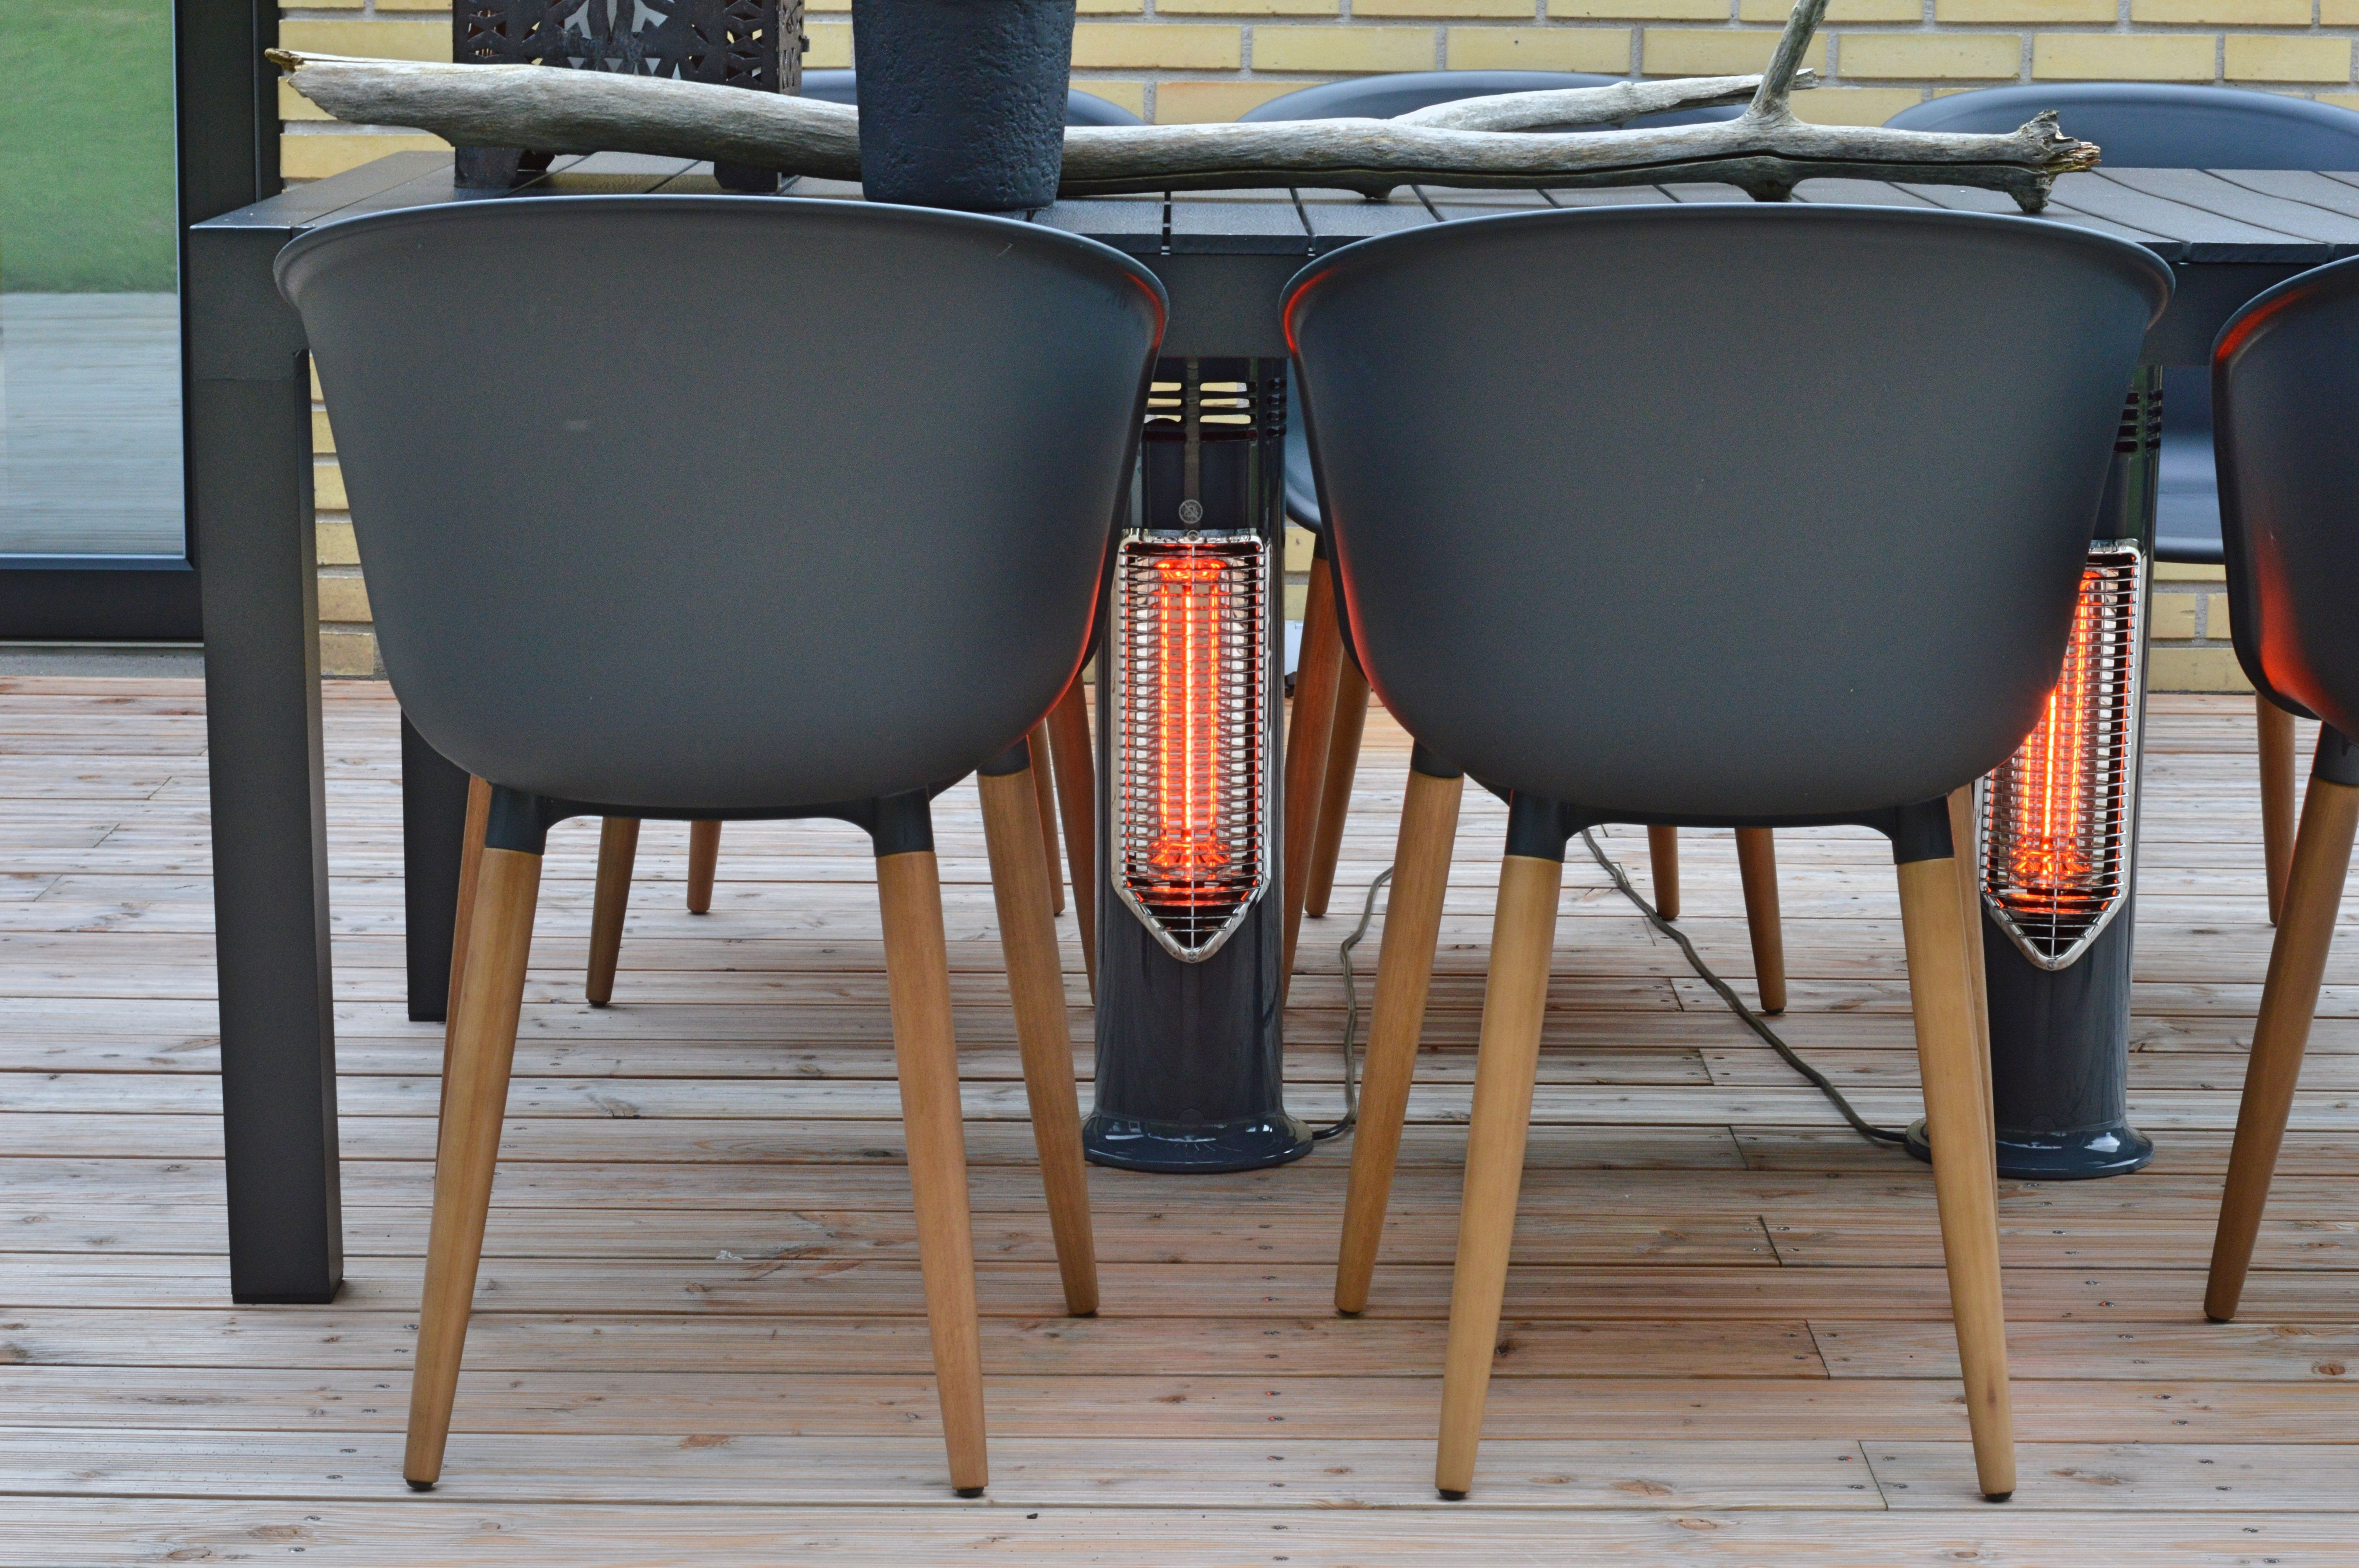 Outdoor Table Heating Safe To Touch Patio Heater Danish with regard to size 6016 X 4000